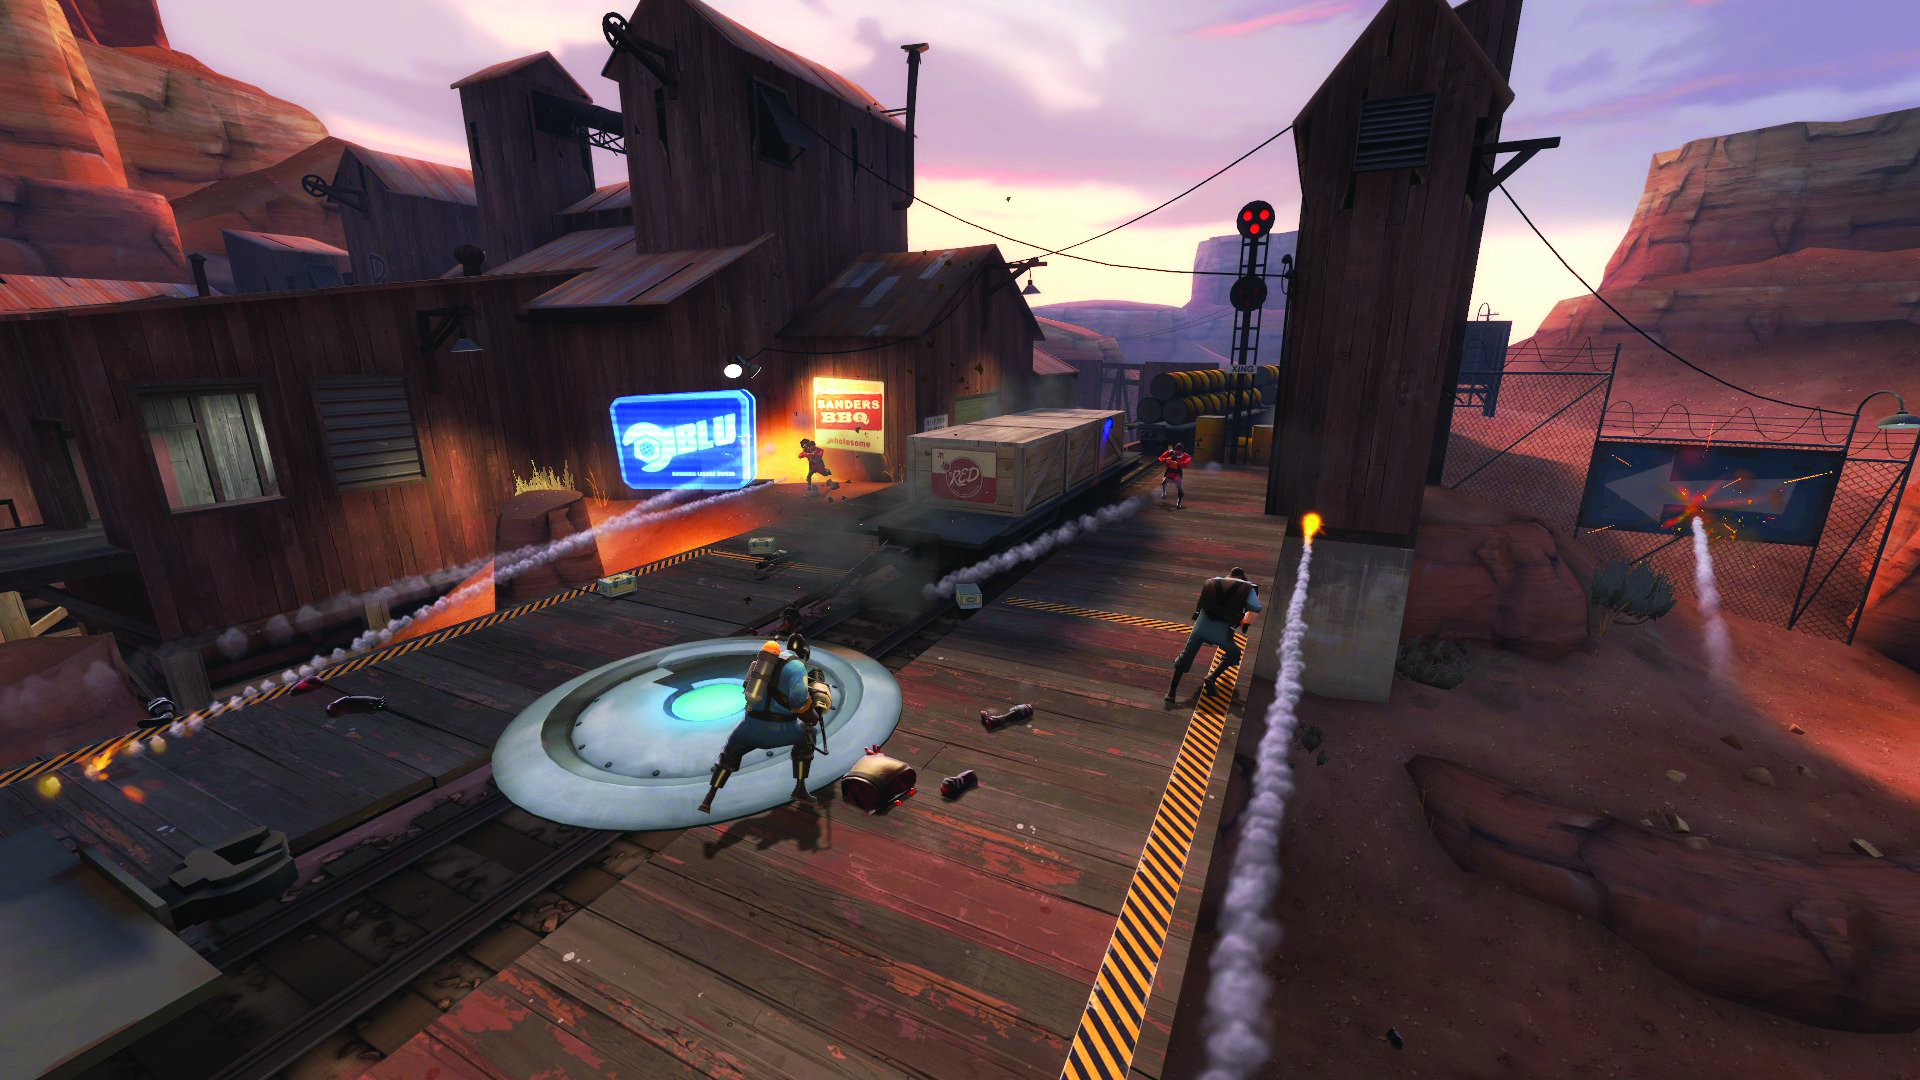 Free Steam games - Team Fortress 2 - Players battle at the train depot